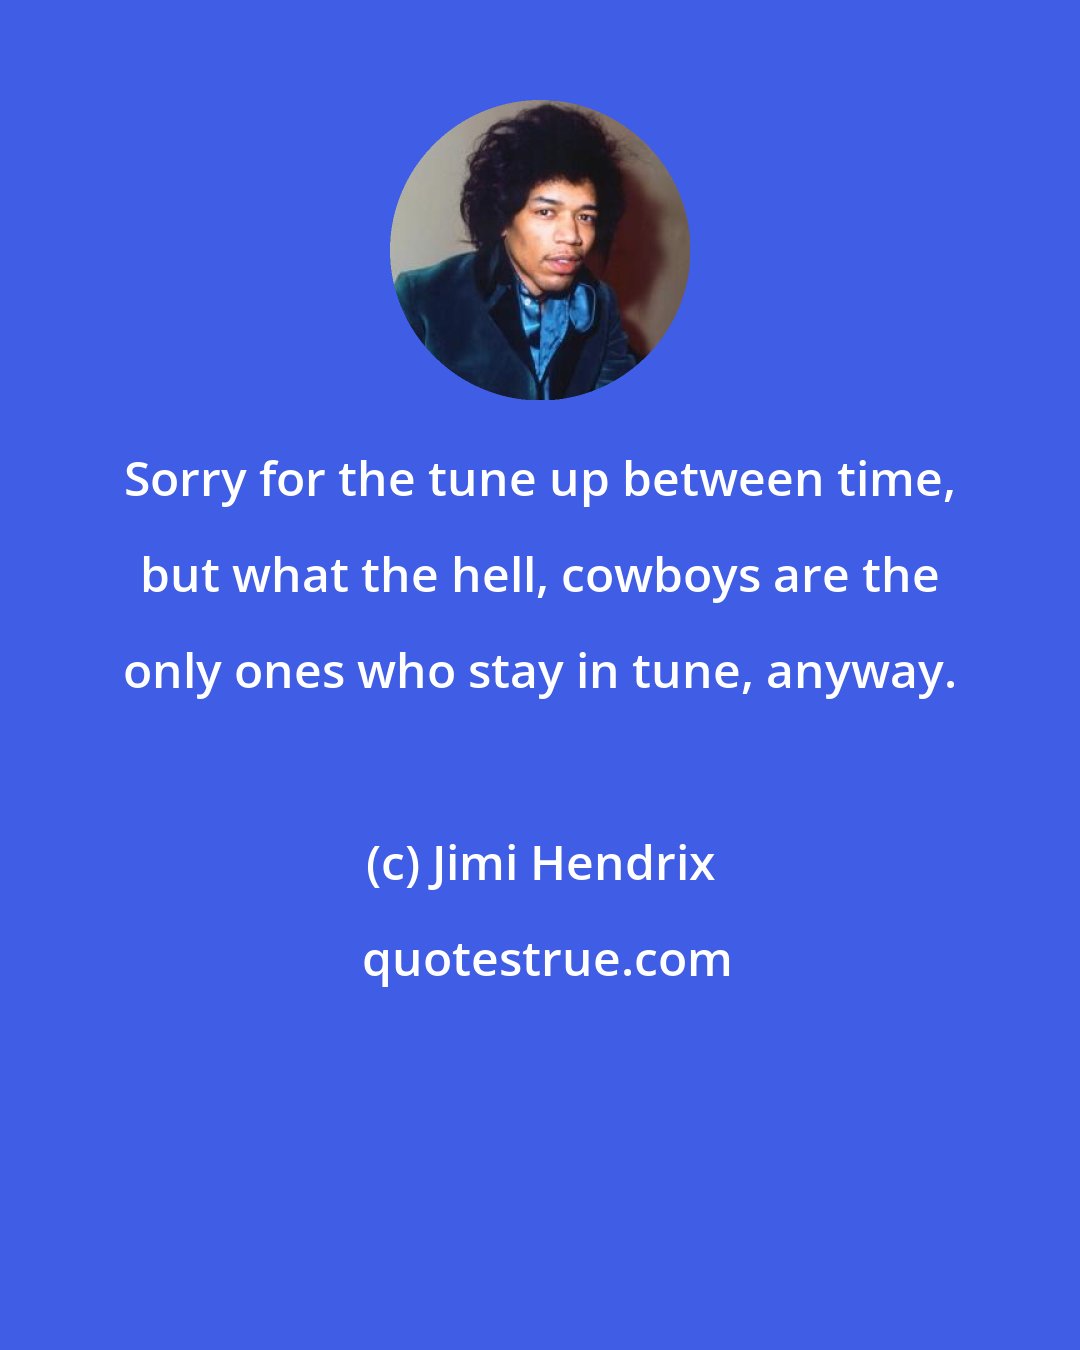 Jimi Hendrix: Sorry for the tune up between time, but what the hell, cowboys are the only ones who stay in tune, anyway.